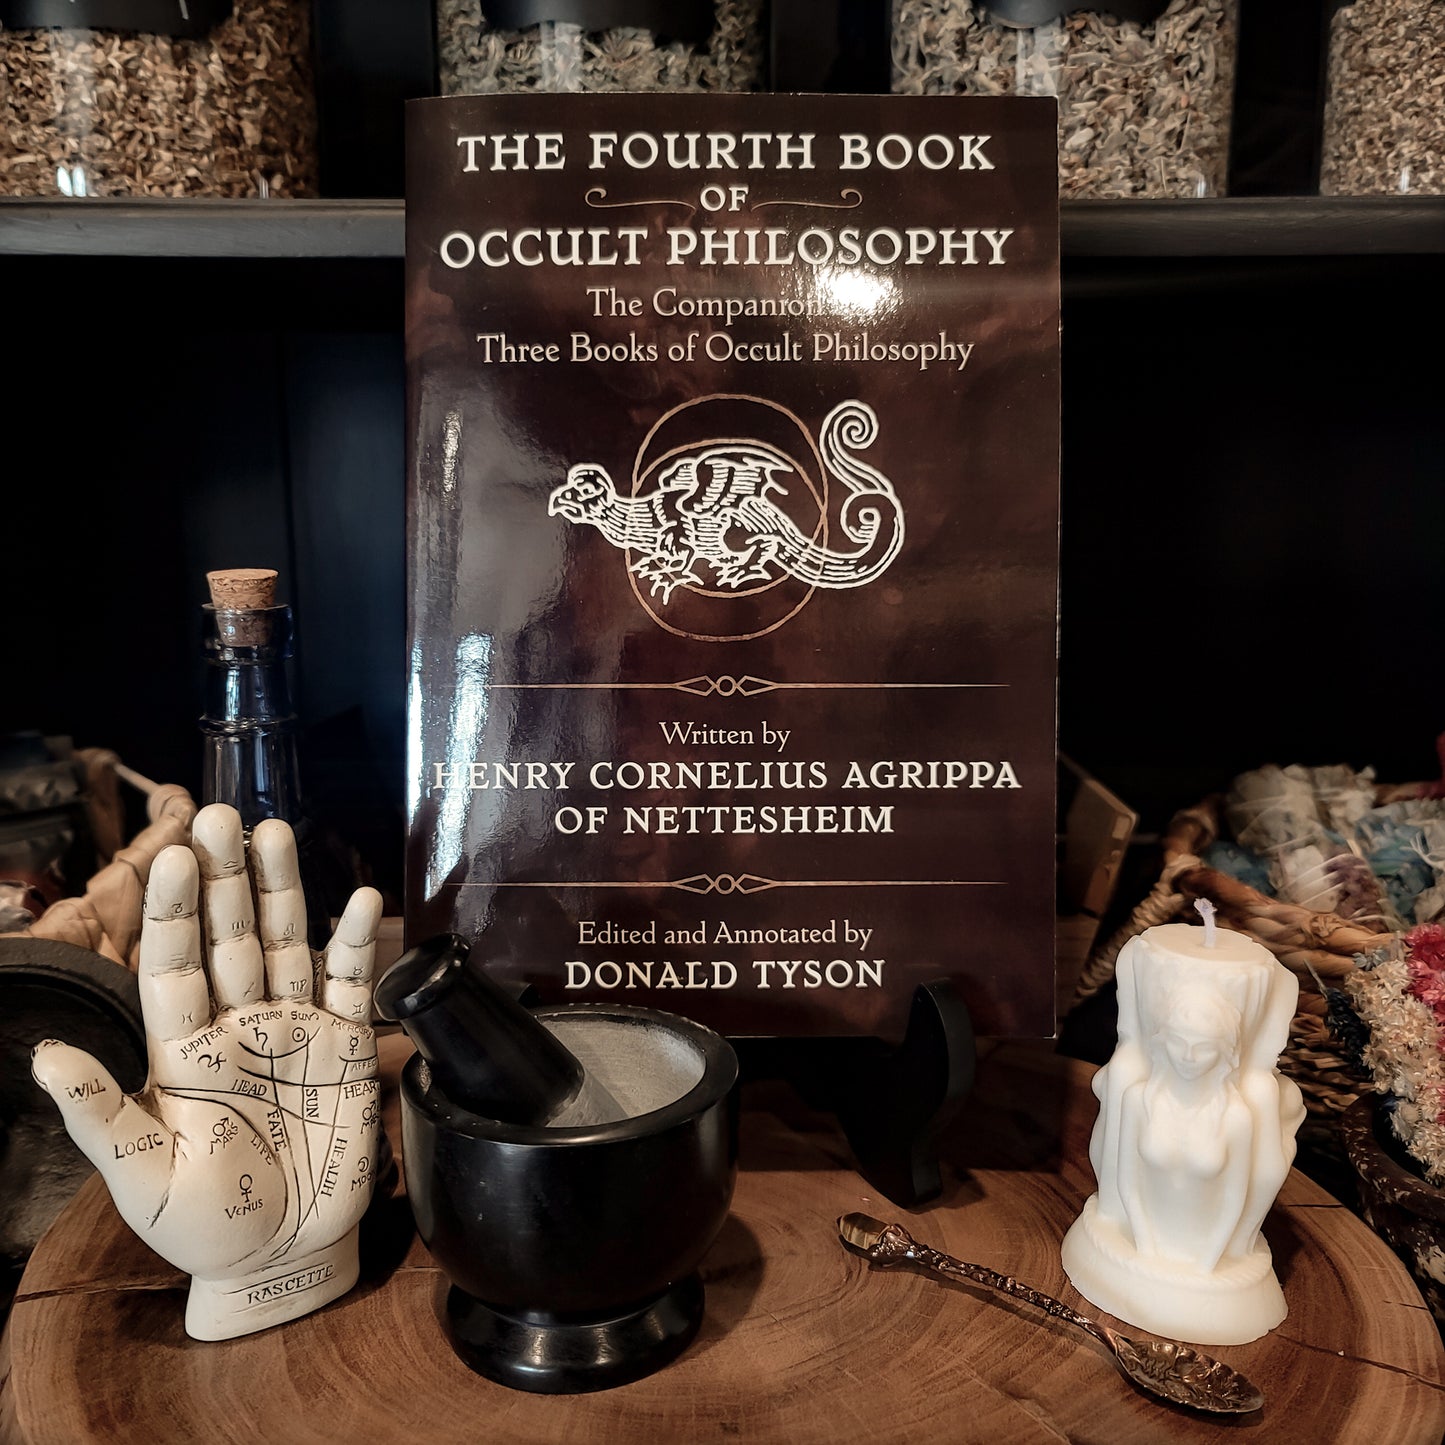 The Fourth Book of Occult Philosophy